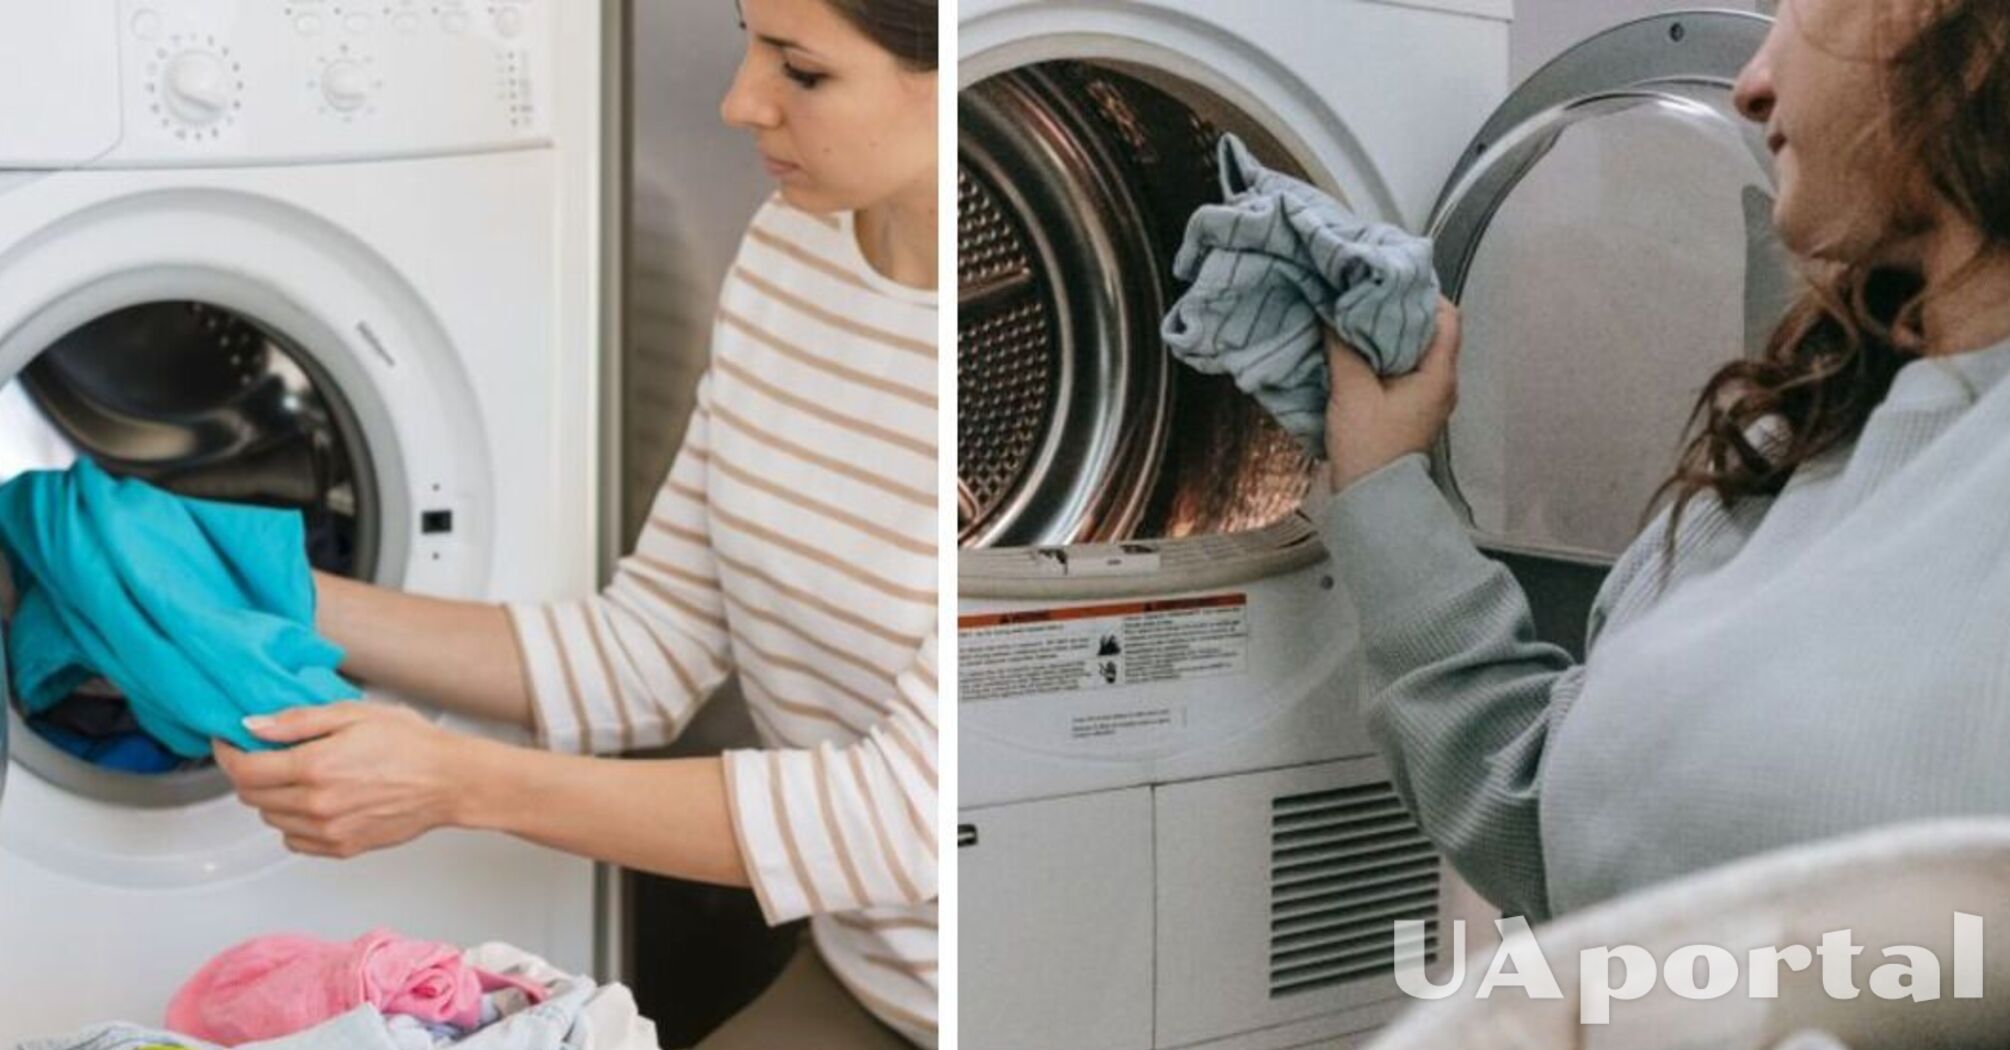 What items shouldn't be washed too often to shorten their service life